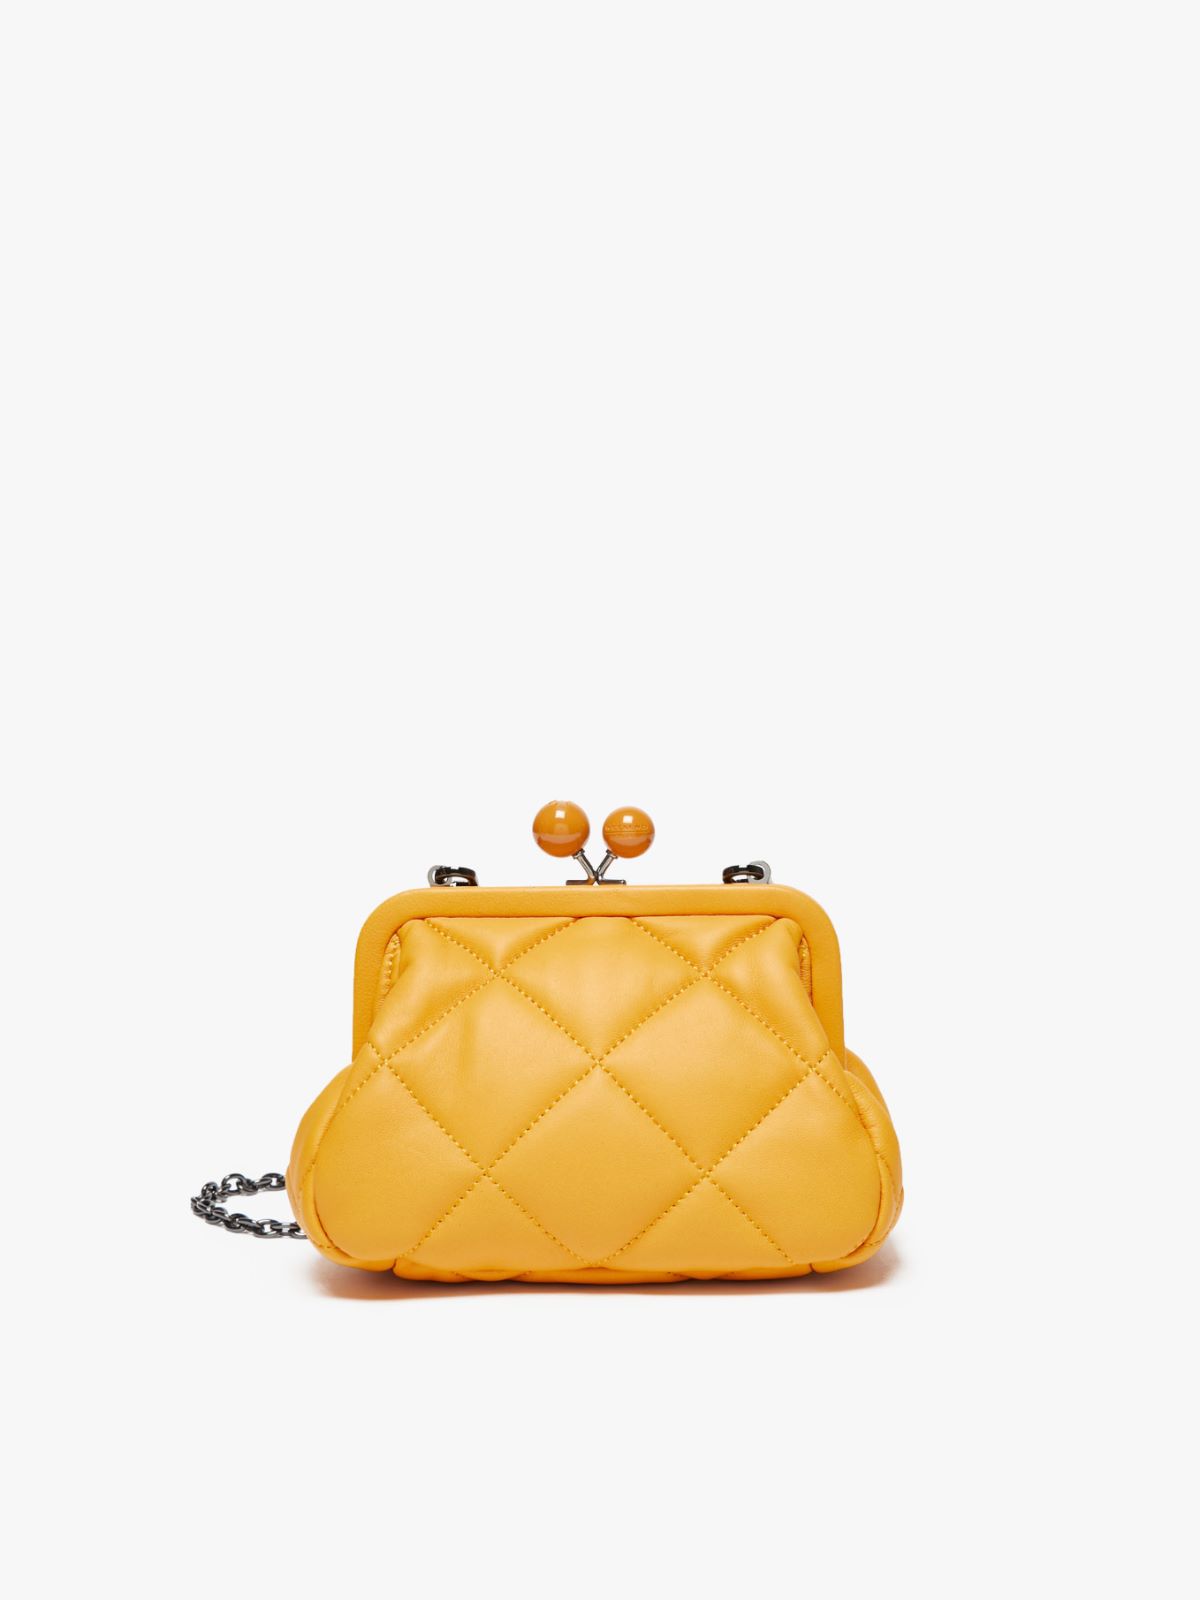 Small Pasticcino Bag in nappa leather - GOLD - Weekend Max Mara